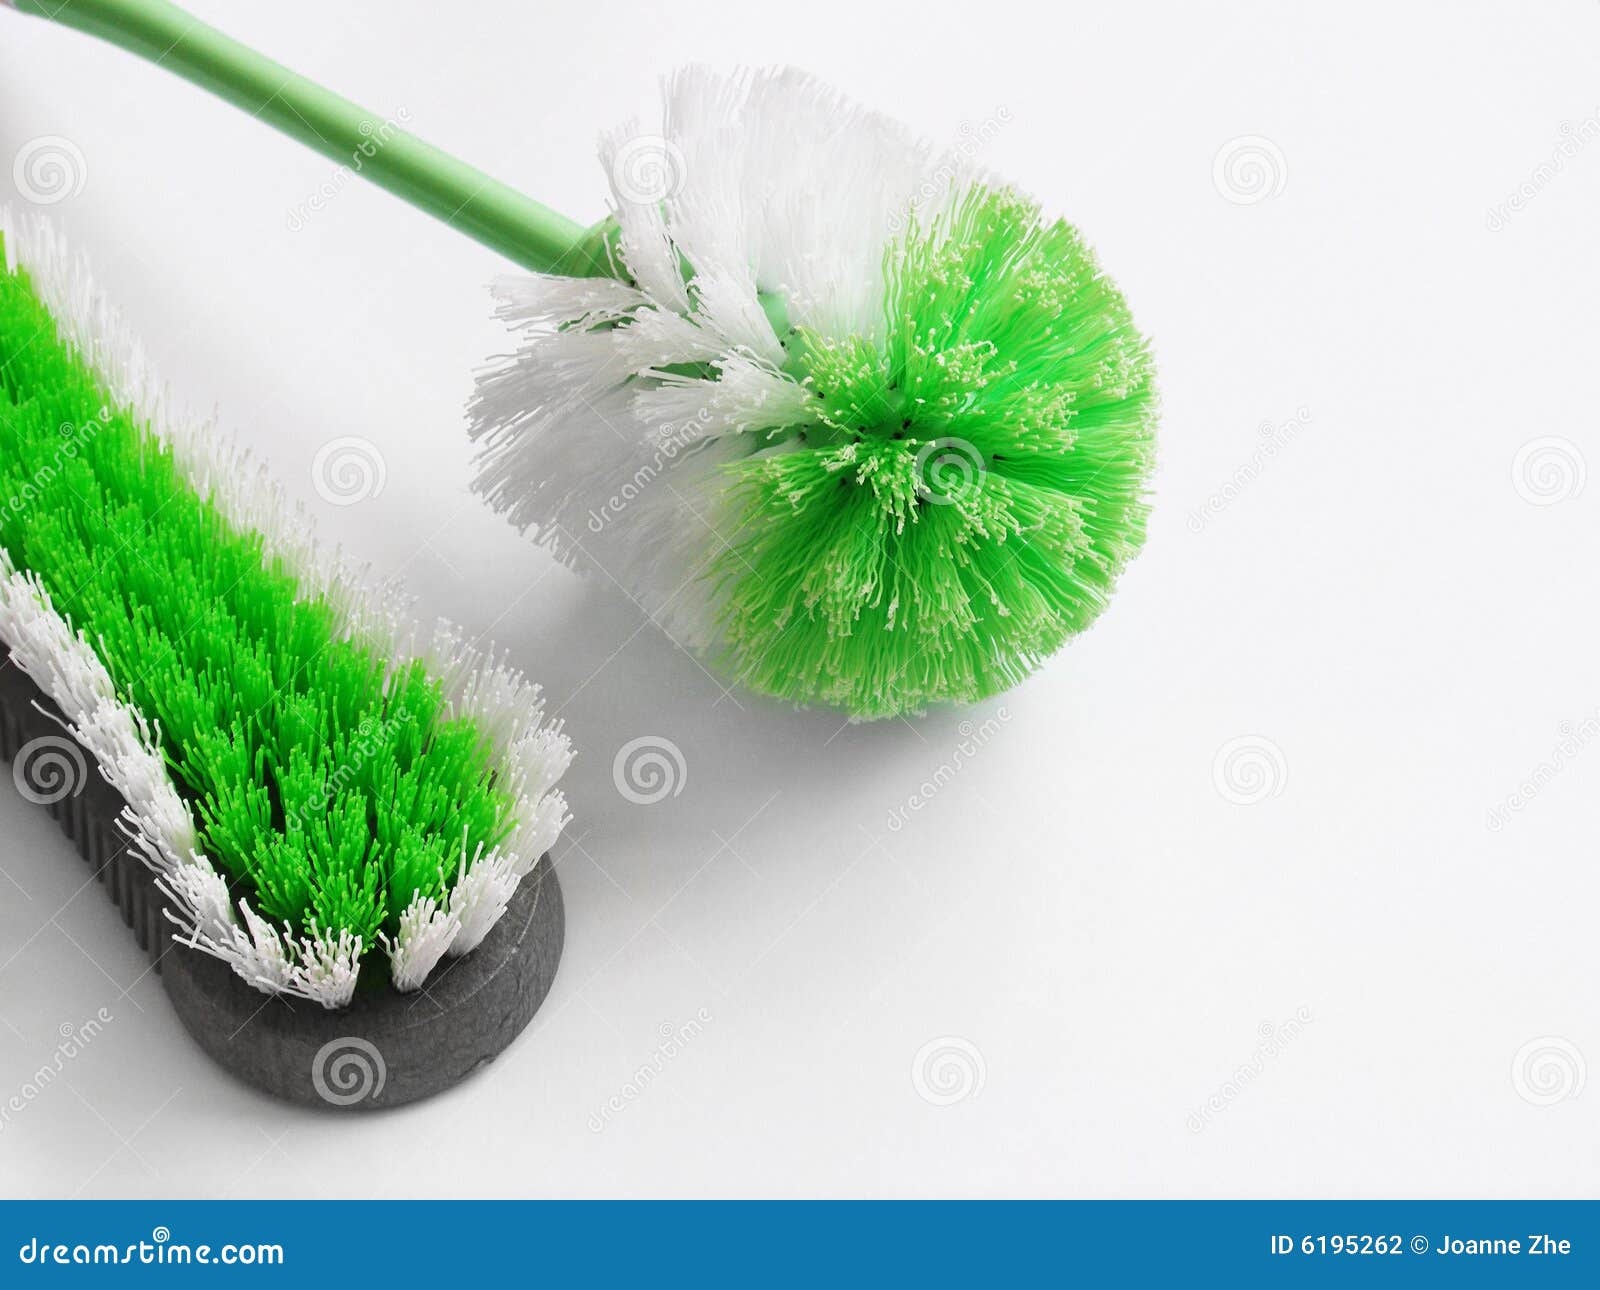 scrubbing cleaning brushes